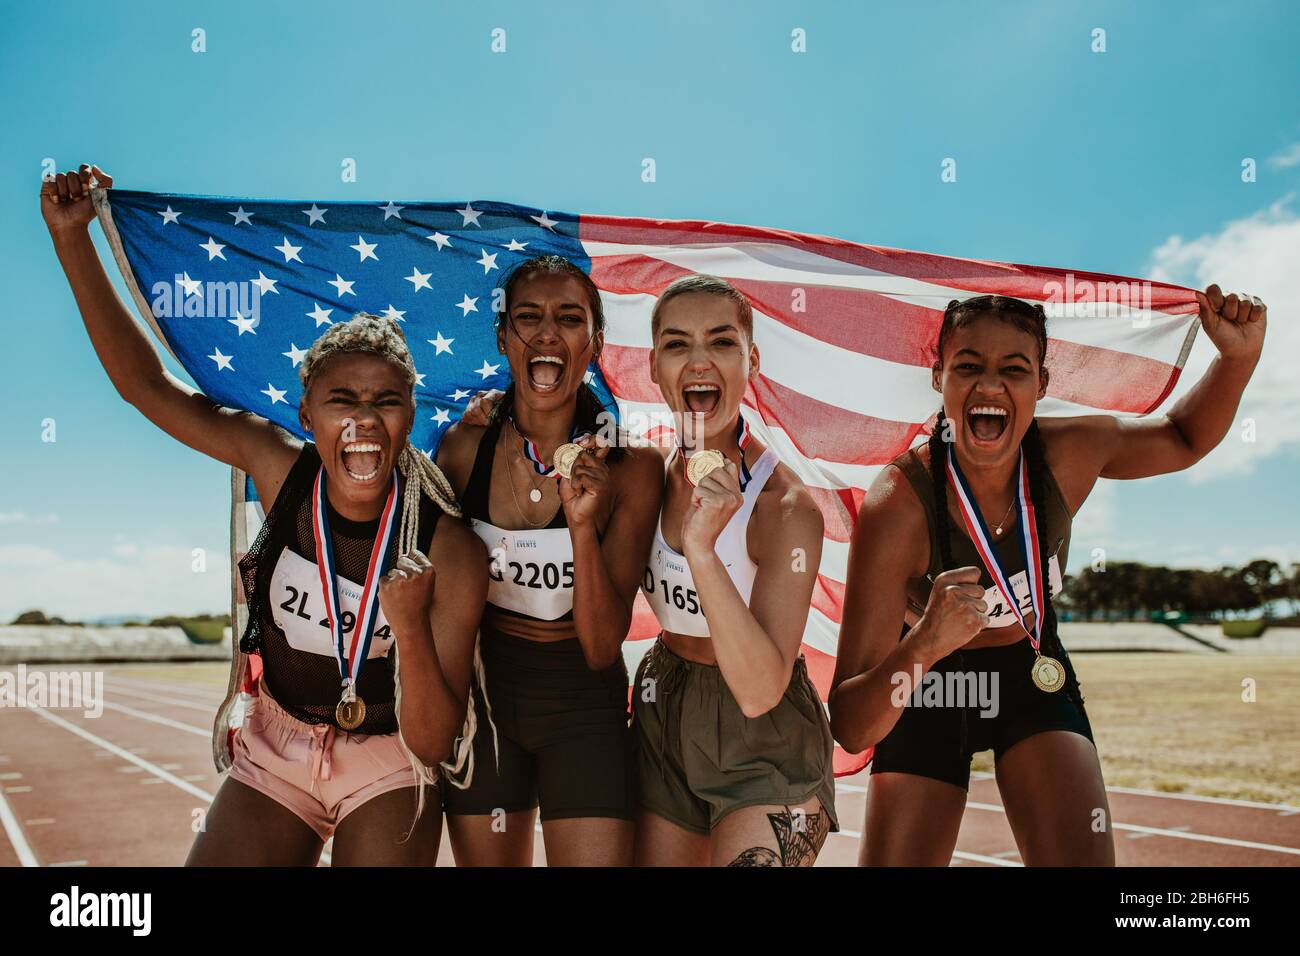 Group of female runner with medals winning a competition. American women athletes celebrating victory while standing together on racetrack holding the Stock Photo